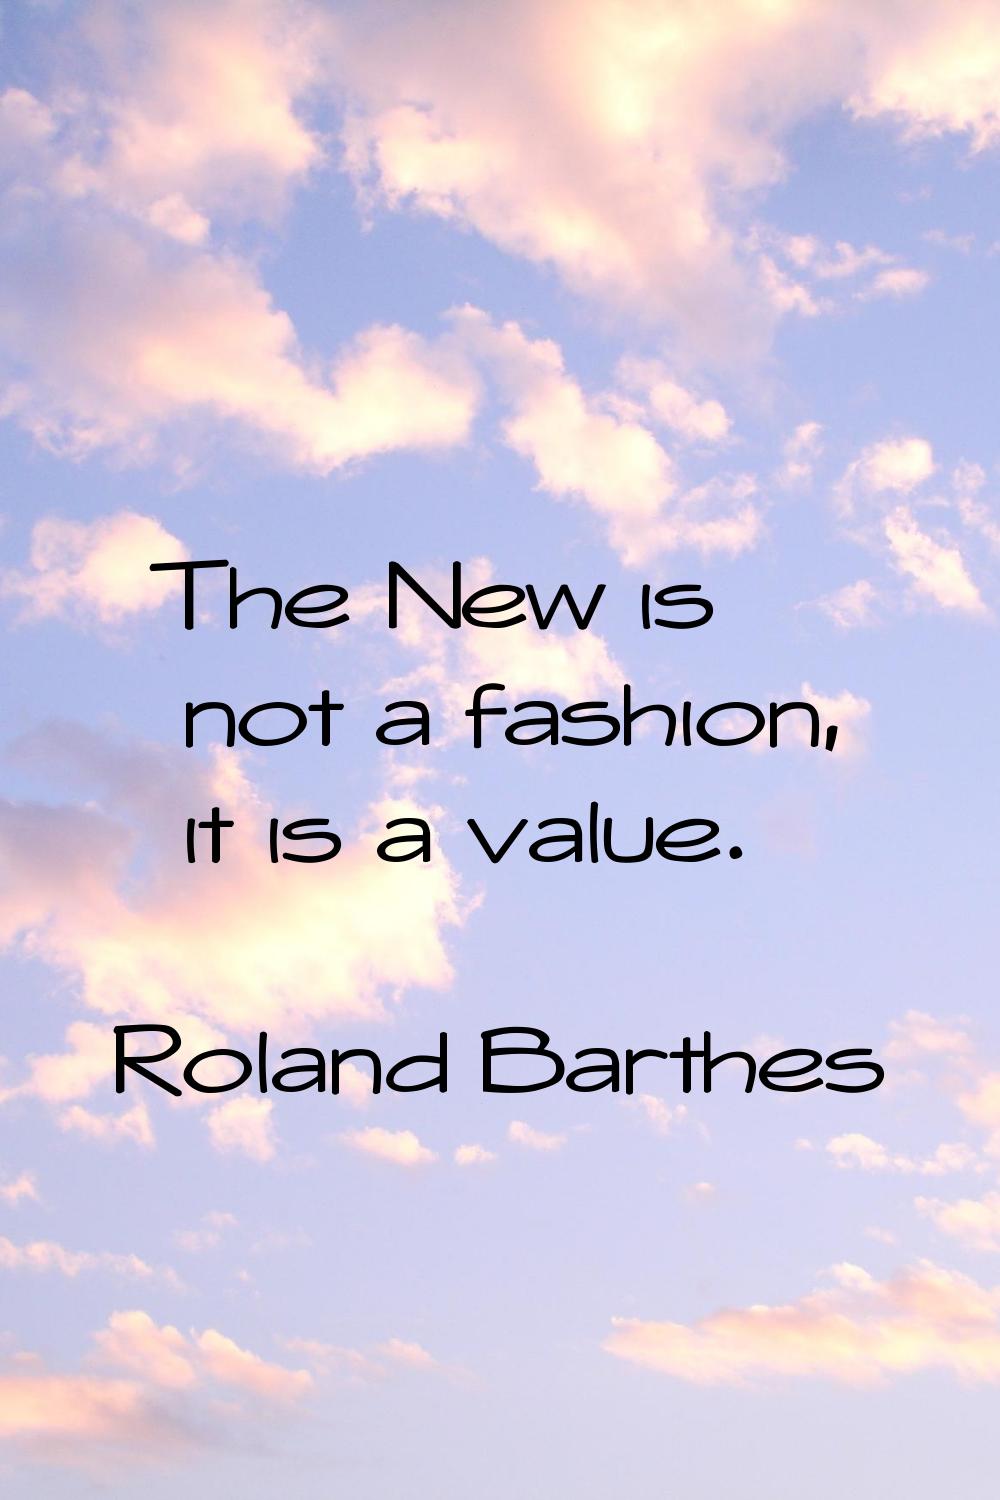 The New is not a fashion, it is a value.